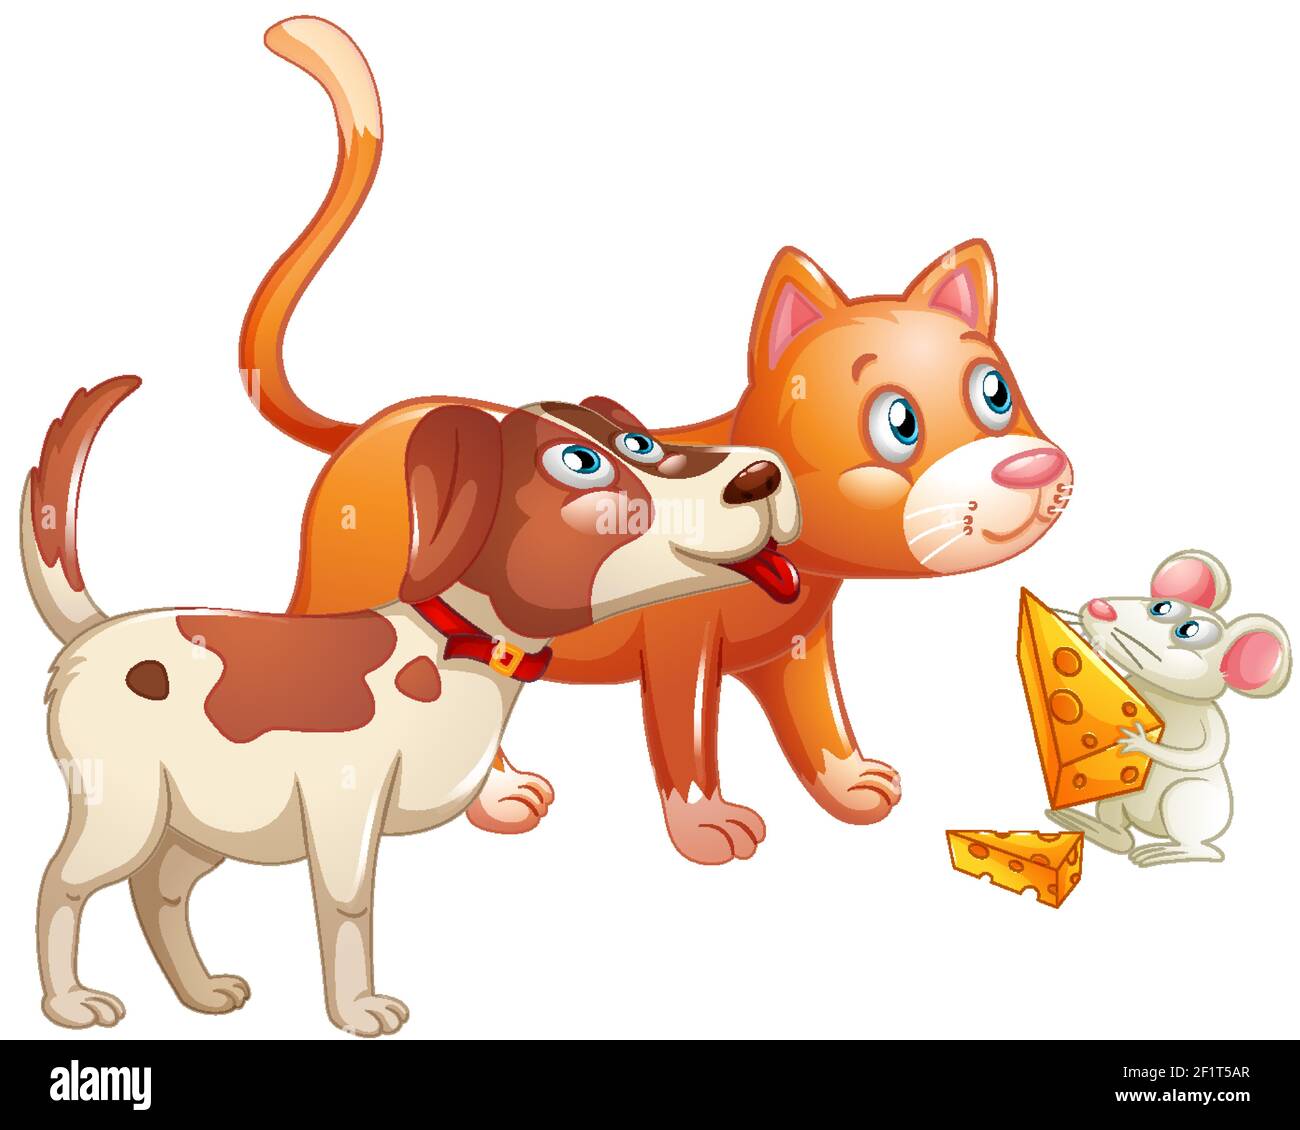 Group Of Animal Dog Cat And Mouse Cartoon Character Isolated On White Background Illustration Stock Vector Image Art Alamy